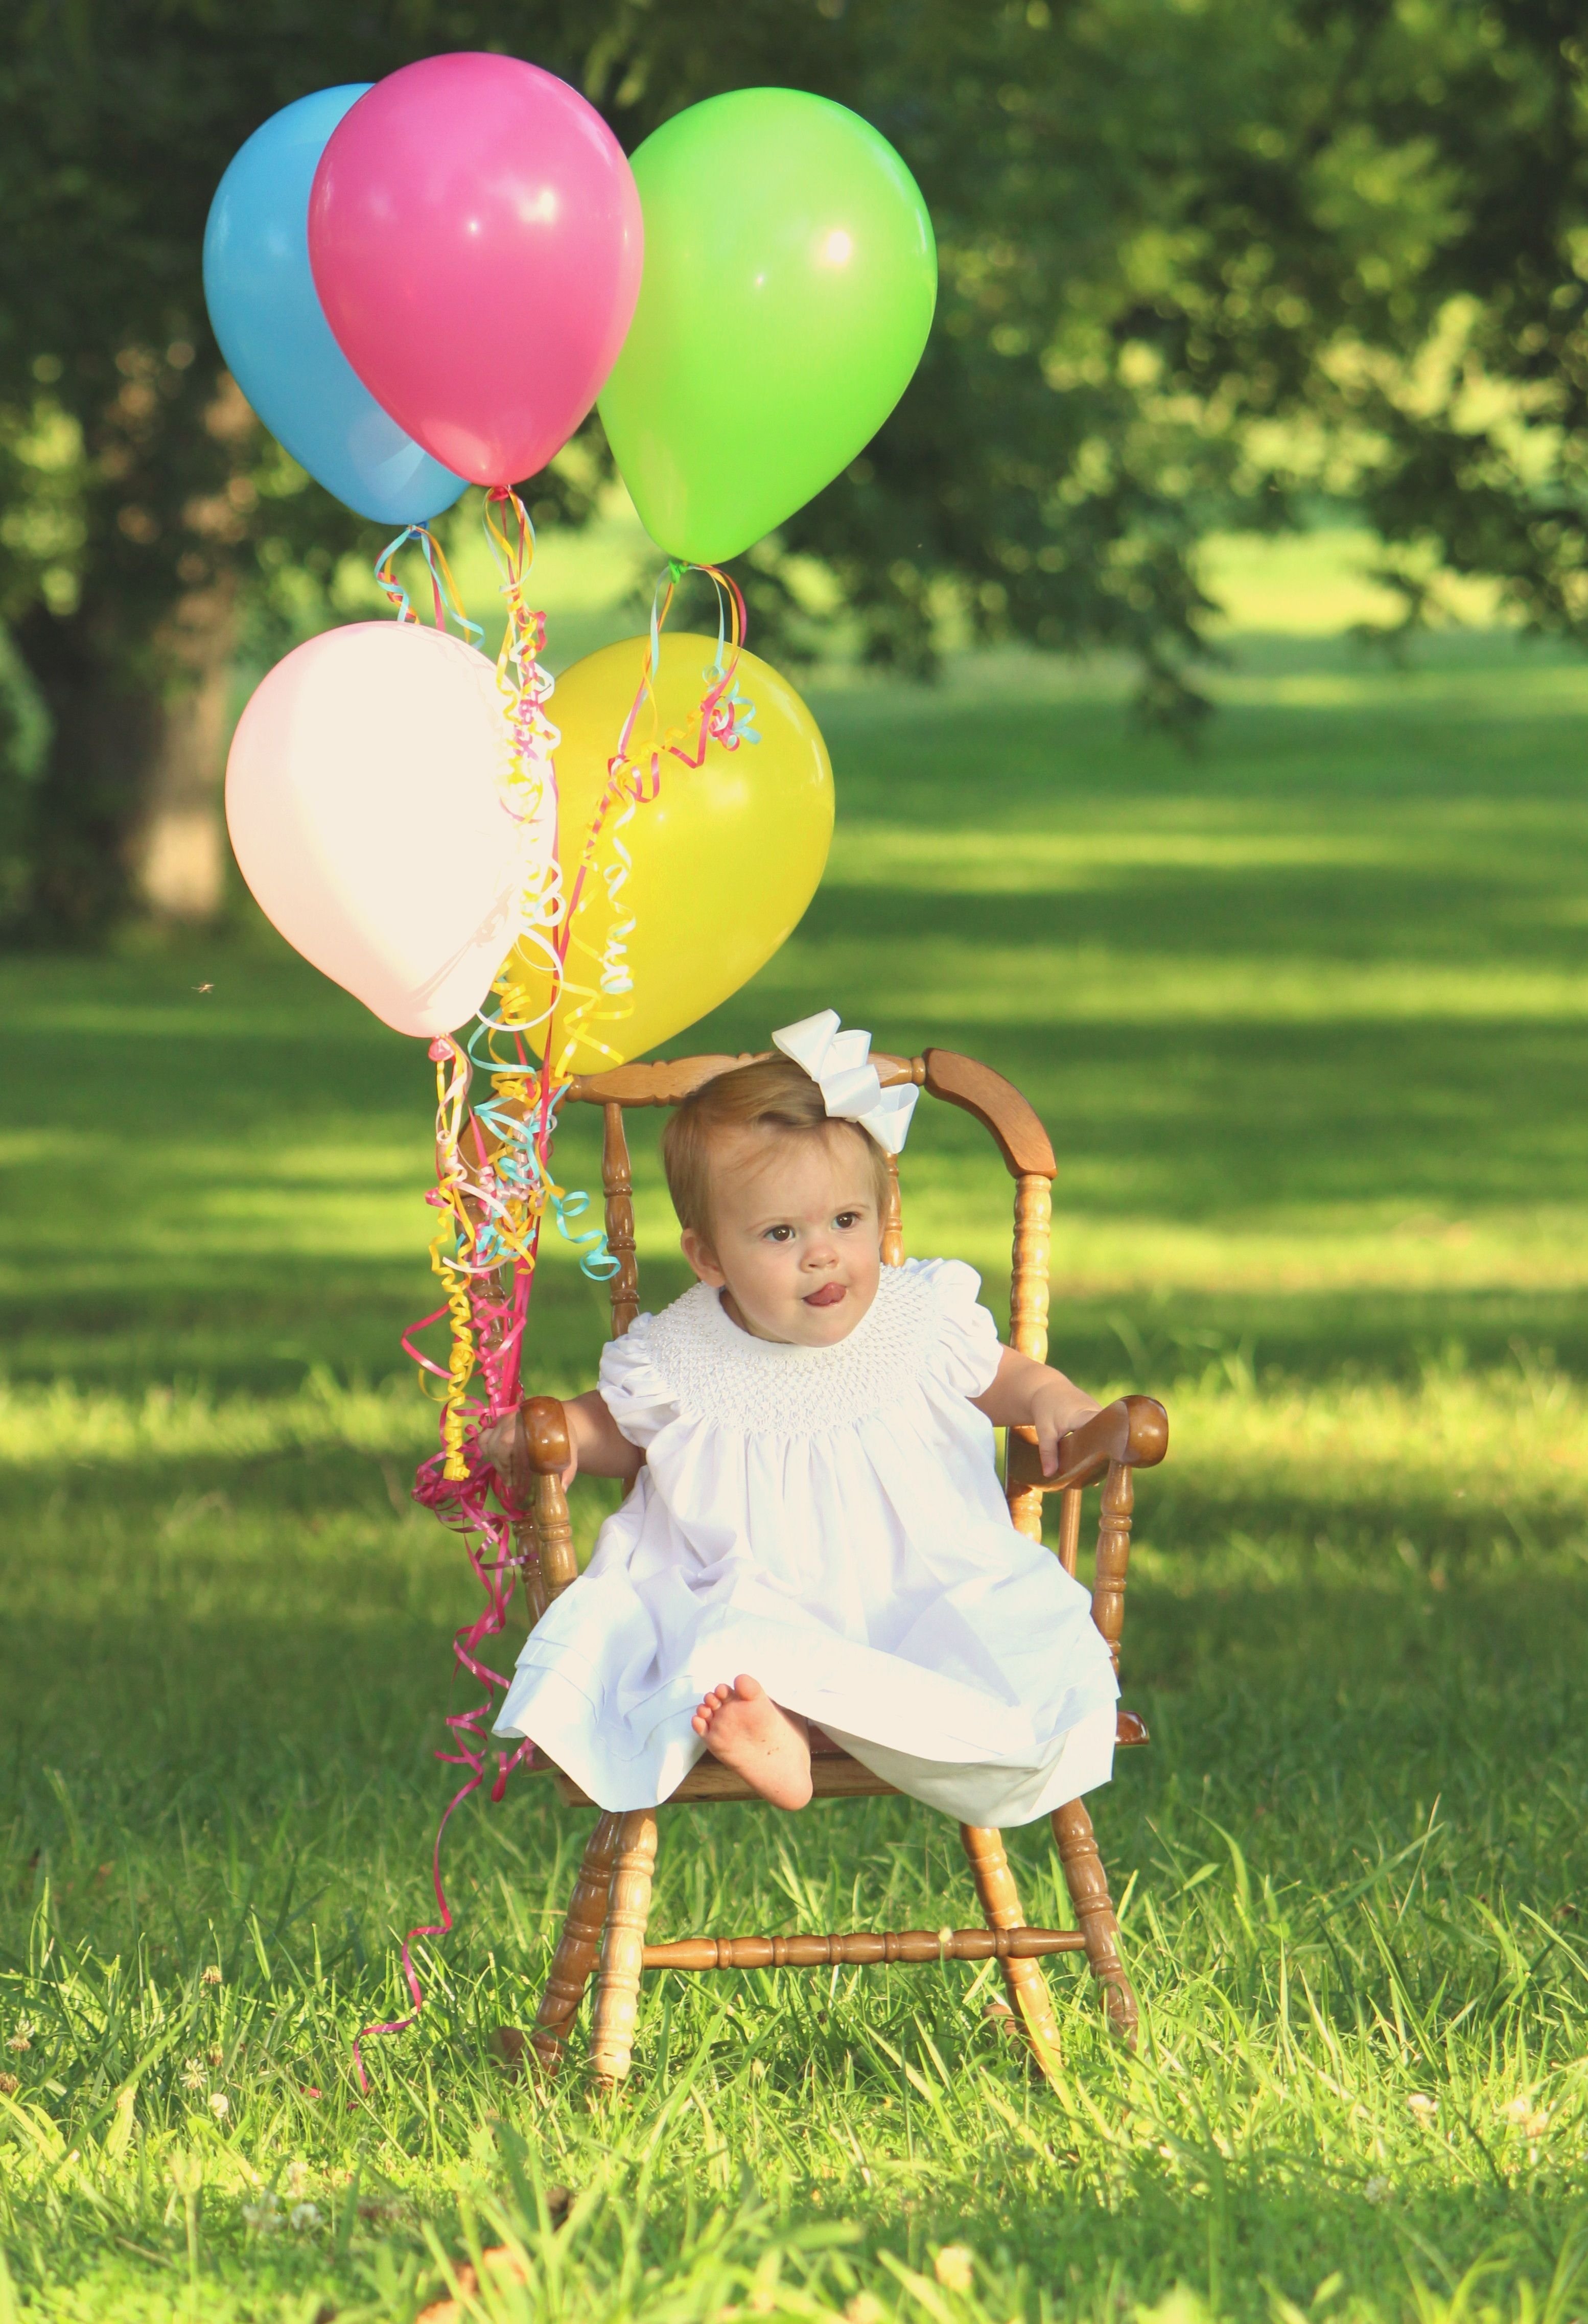 10 Fabulous 1 Year Old Photo Ideas one year old picture ideas firstbirthday photography 2022